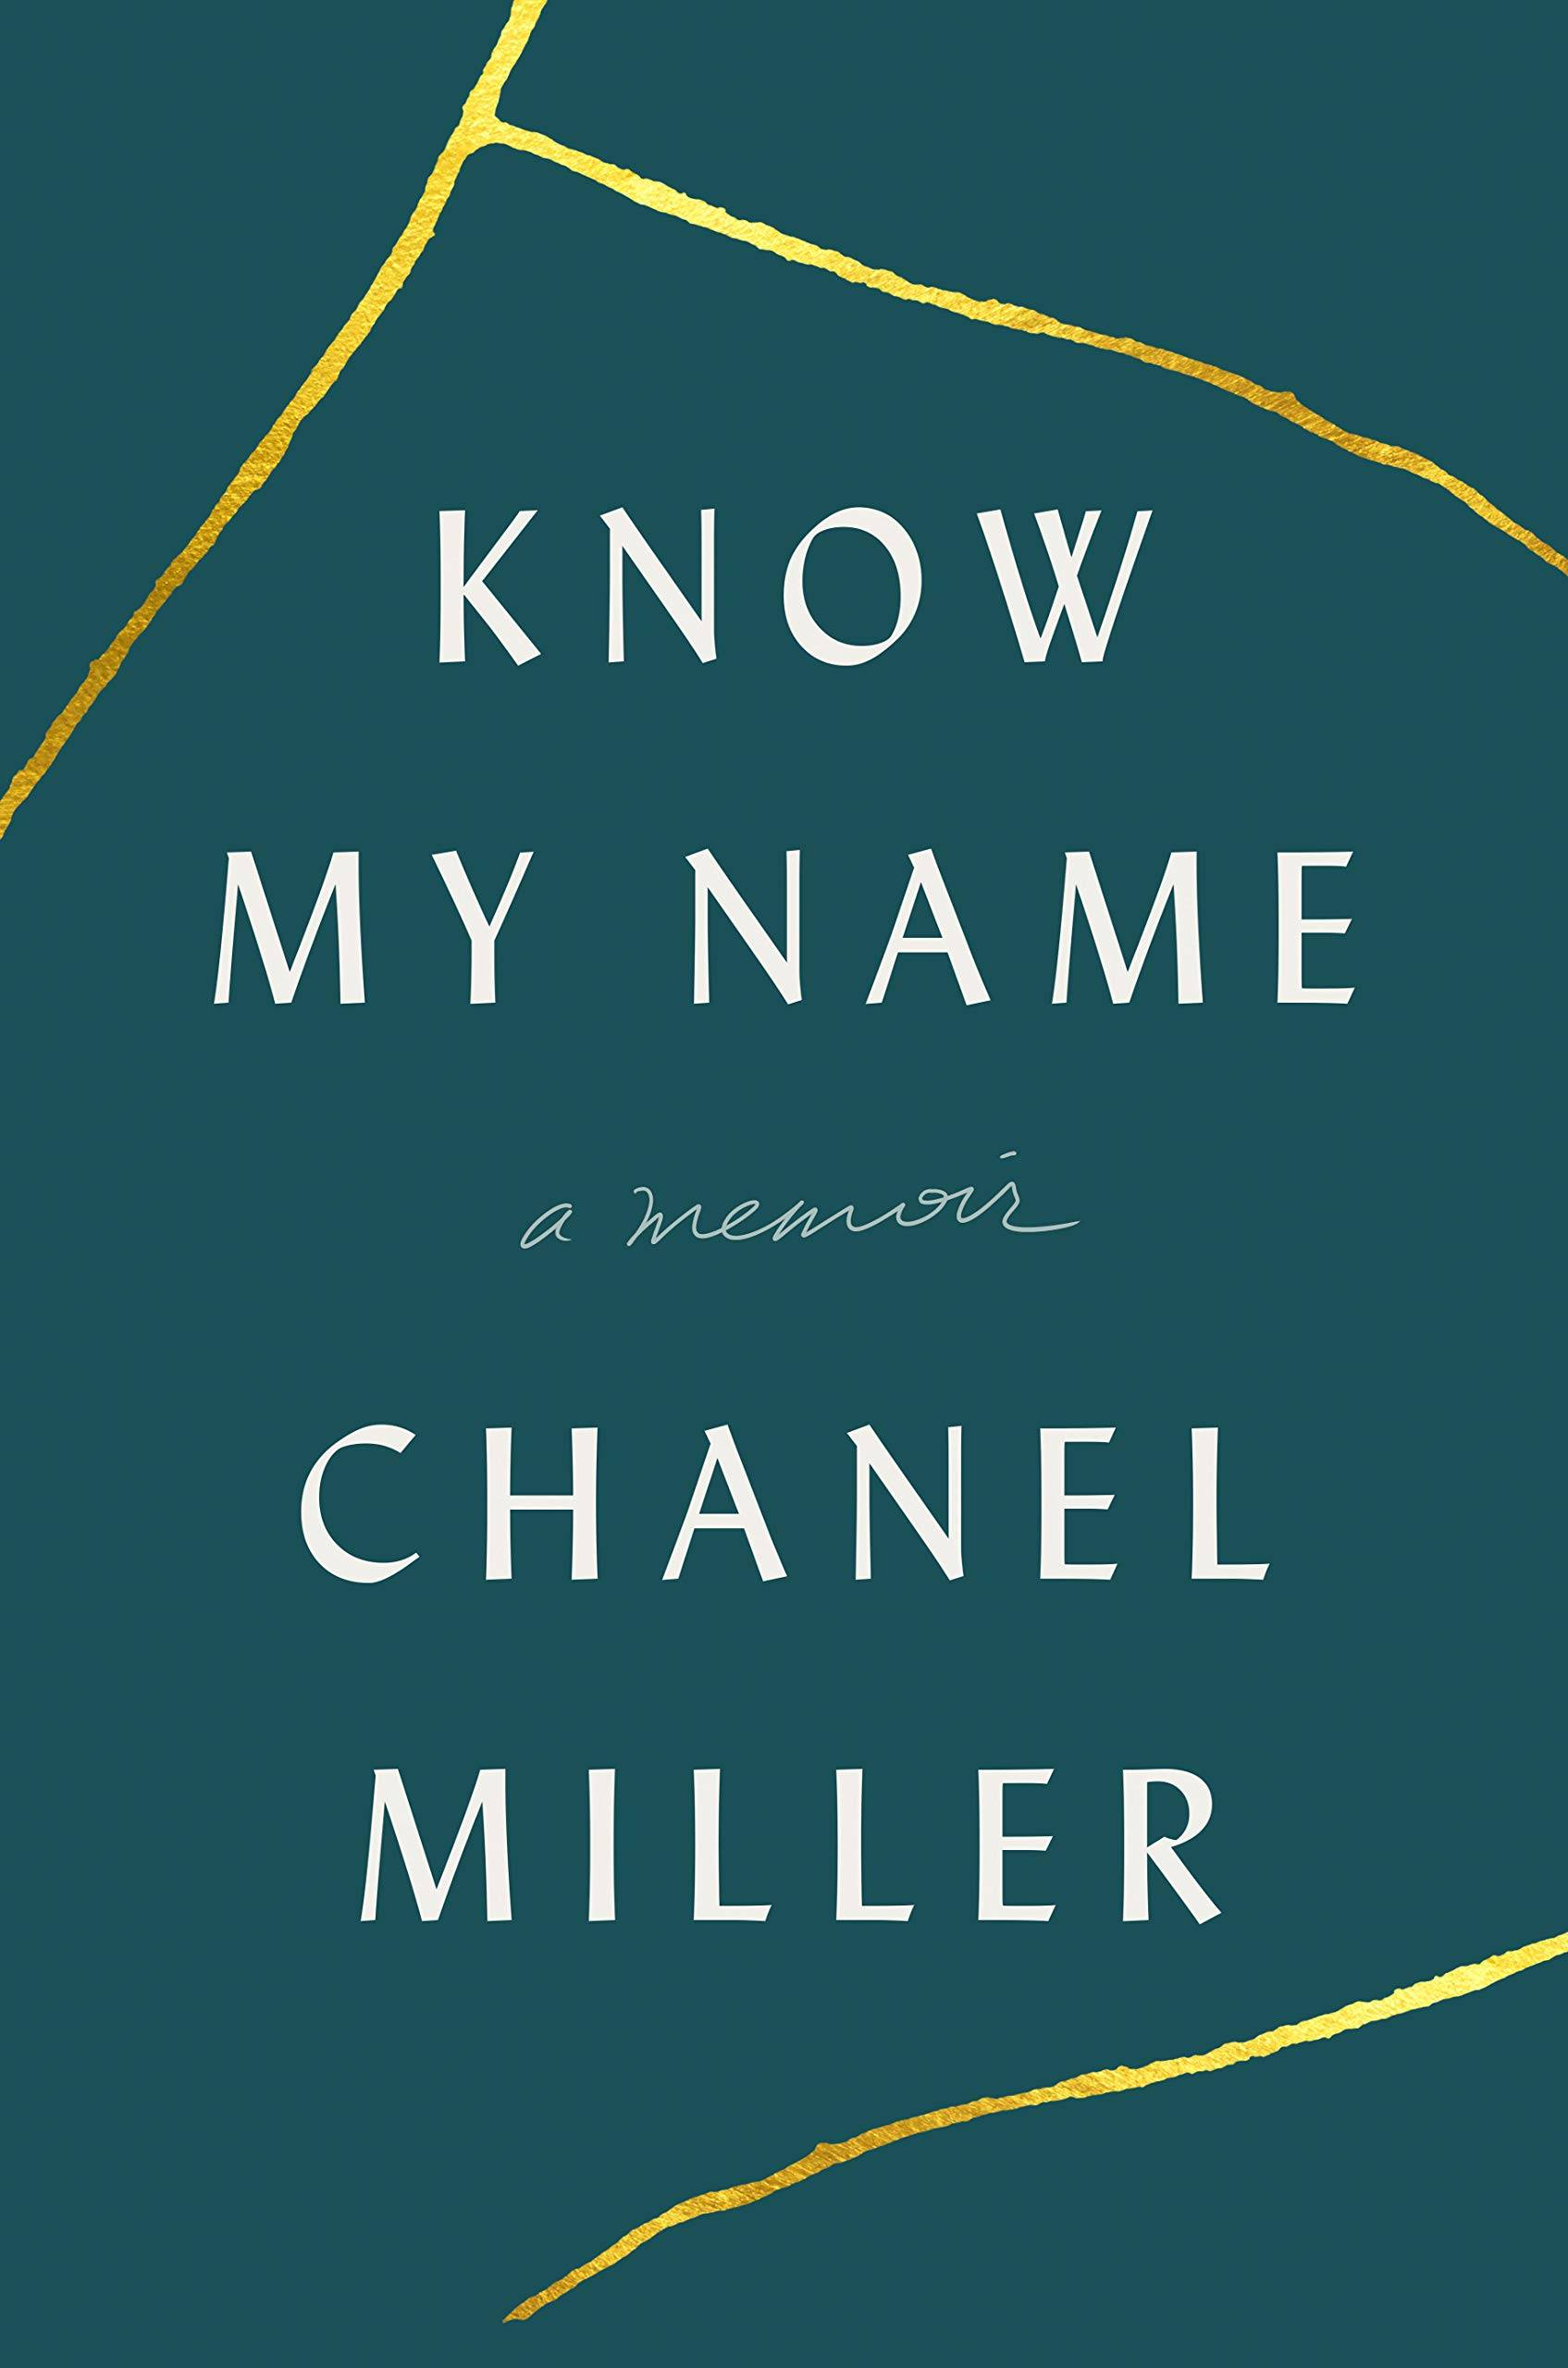 Dark green with gold accents "Know My Name" book cover